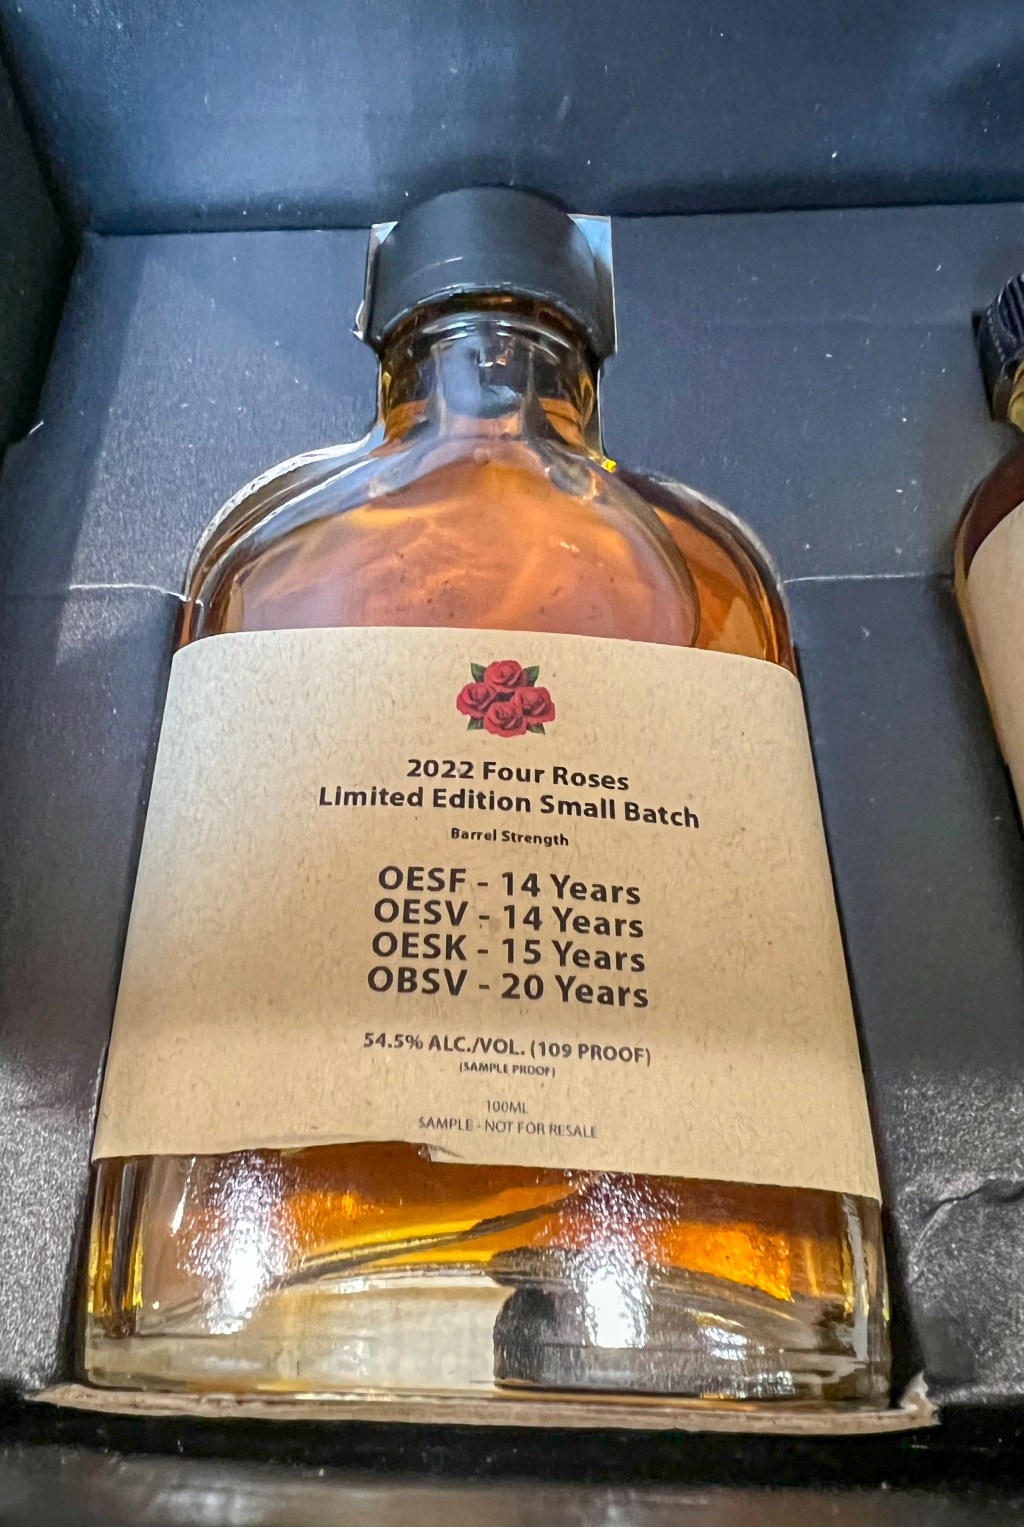 2022 Four Roses Limited Edition Small Batch